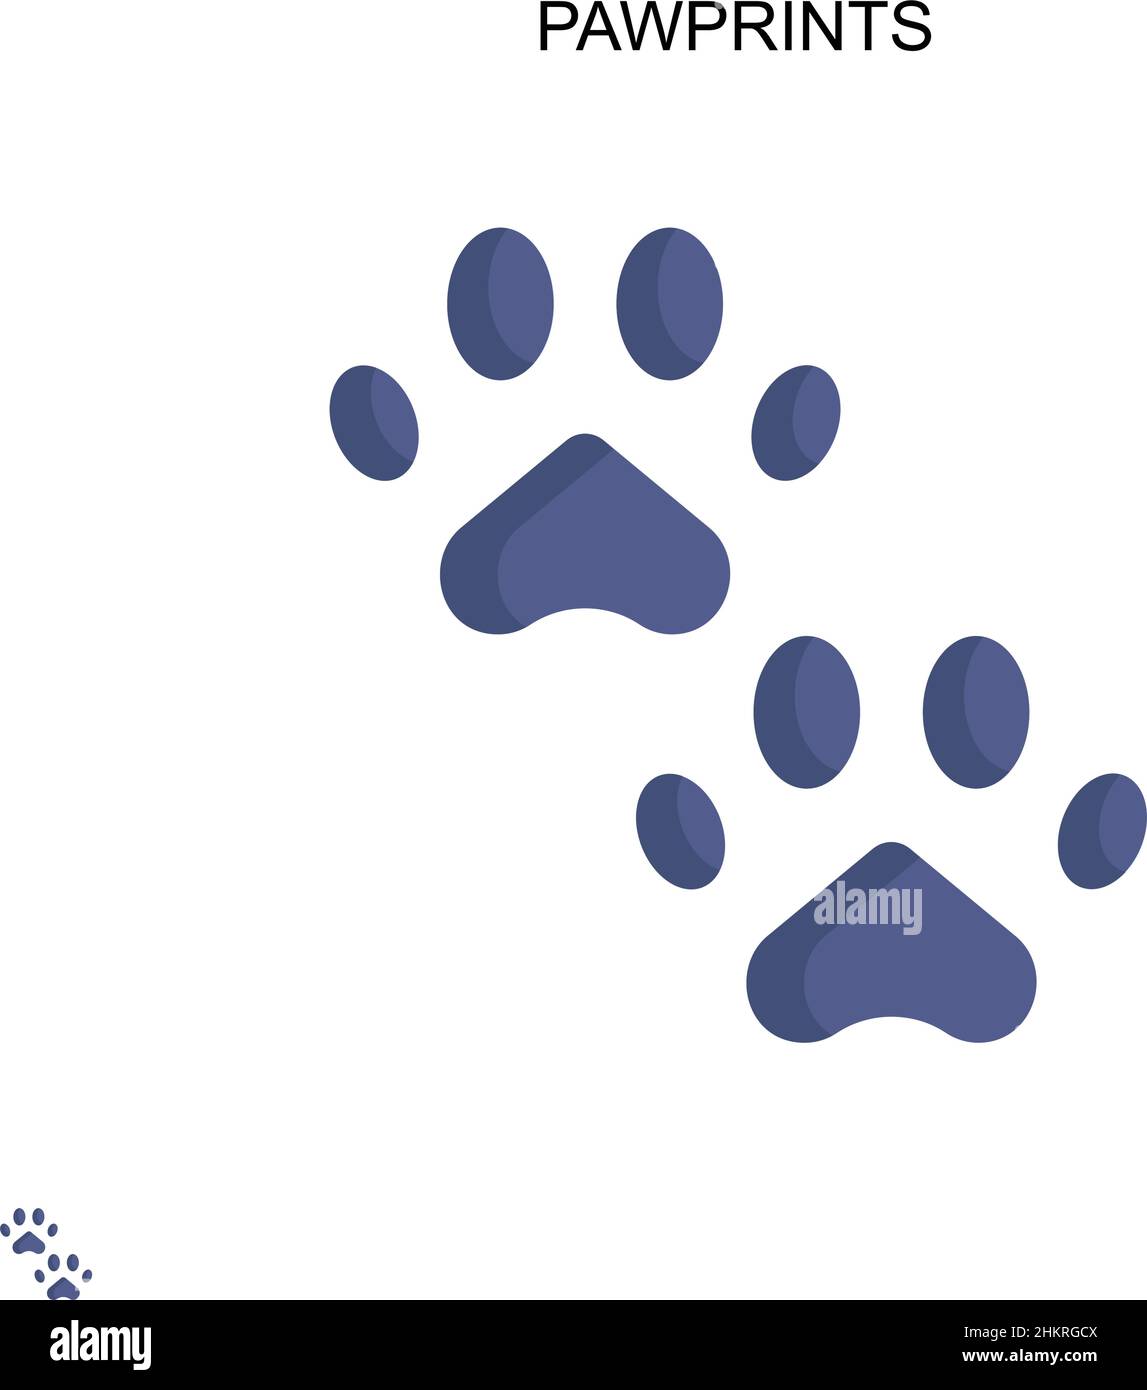 Pawprints Simple vector icon. Illustration symbol design template for web mobile UI element. Stock Vector